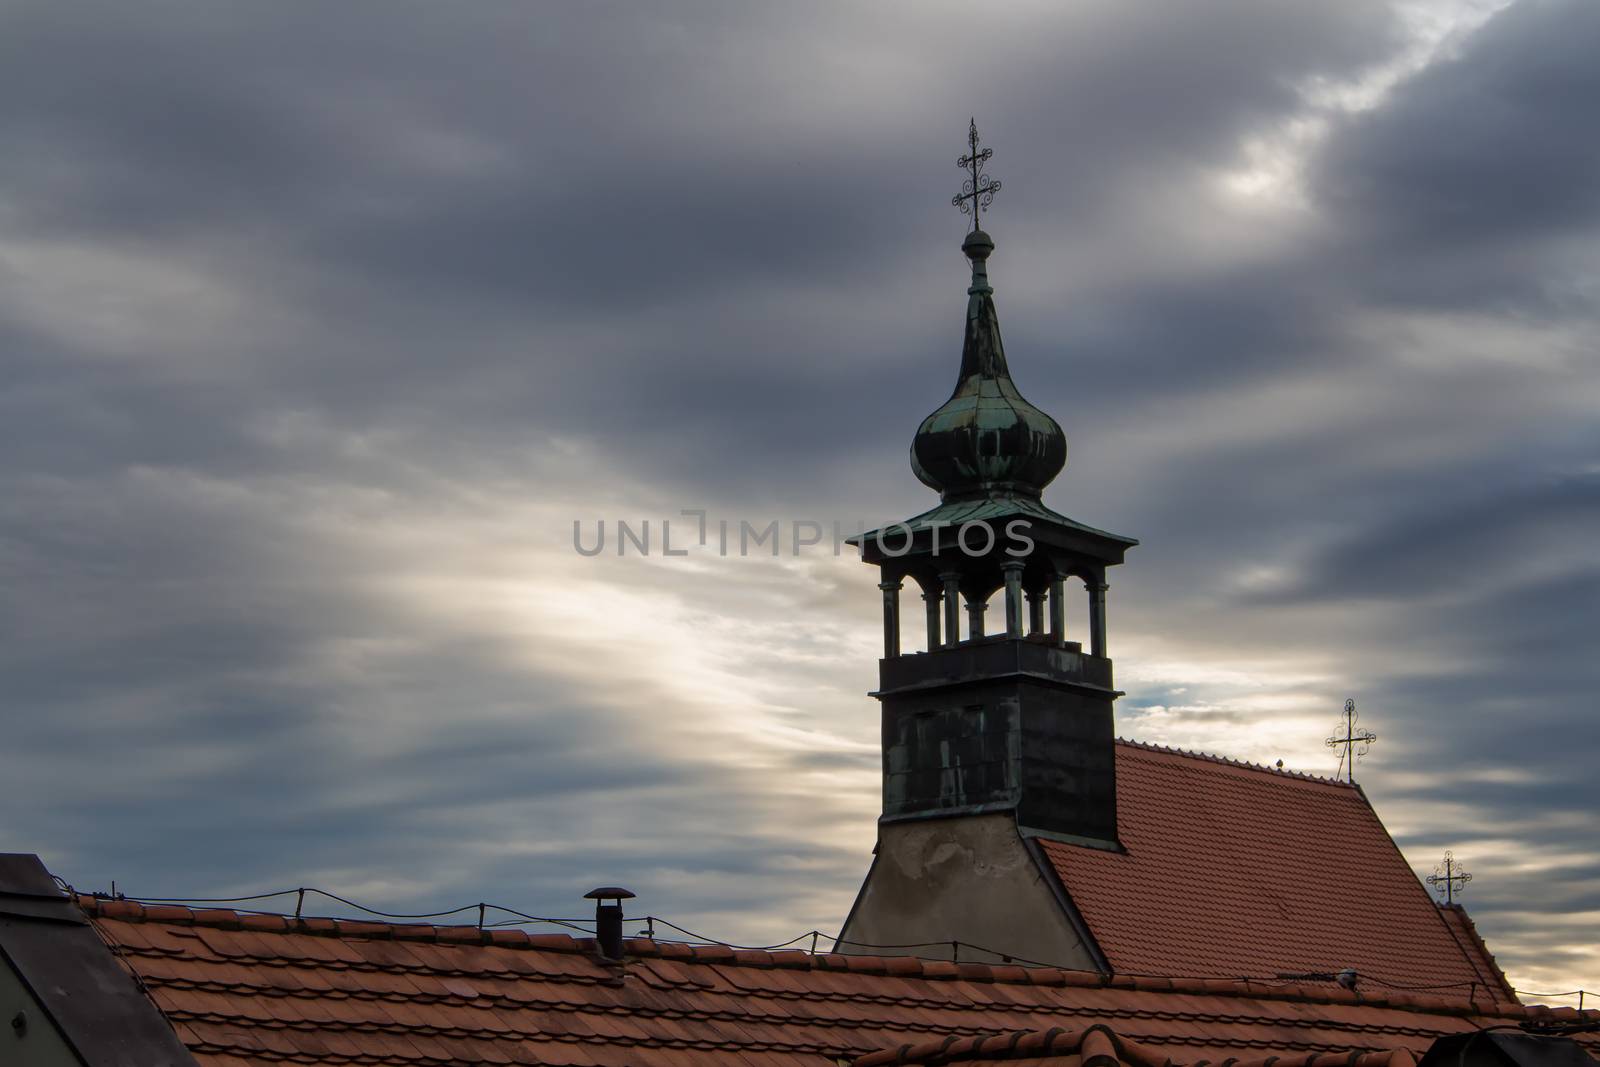 Church of St. Nicolas in Bratislava, Slovakia. Early cloudy rainy morning. Heavy dark clouds broken by a sunshine. Roof in the foreground.